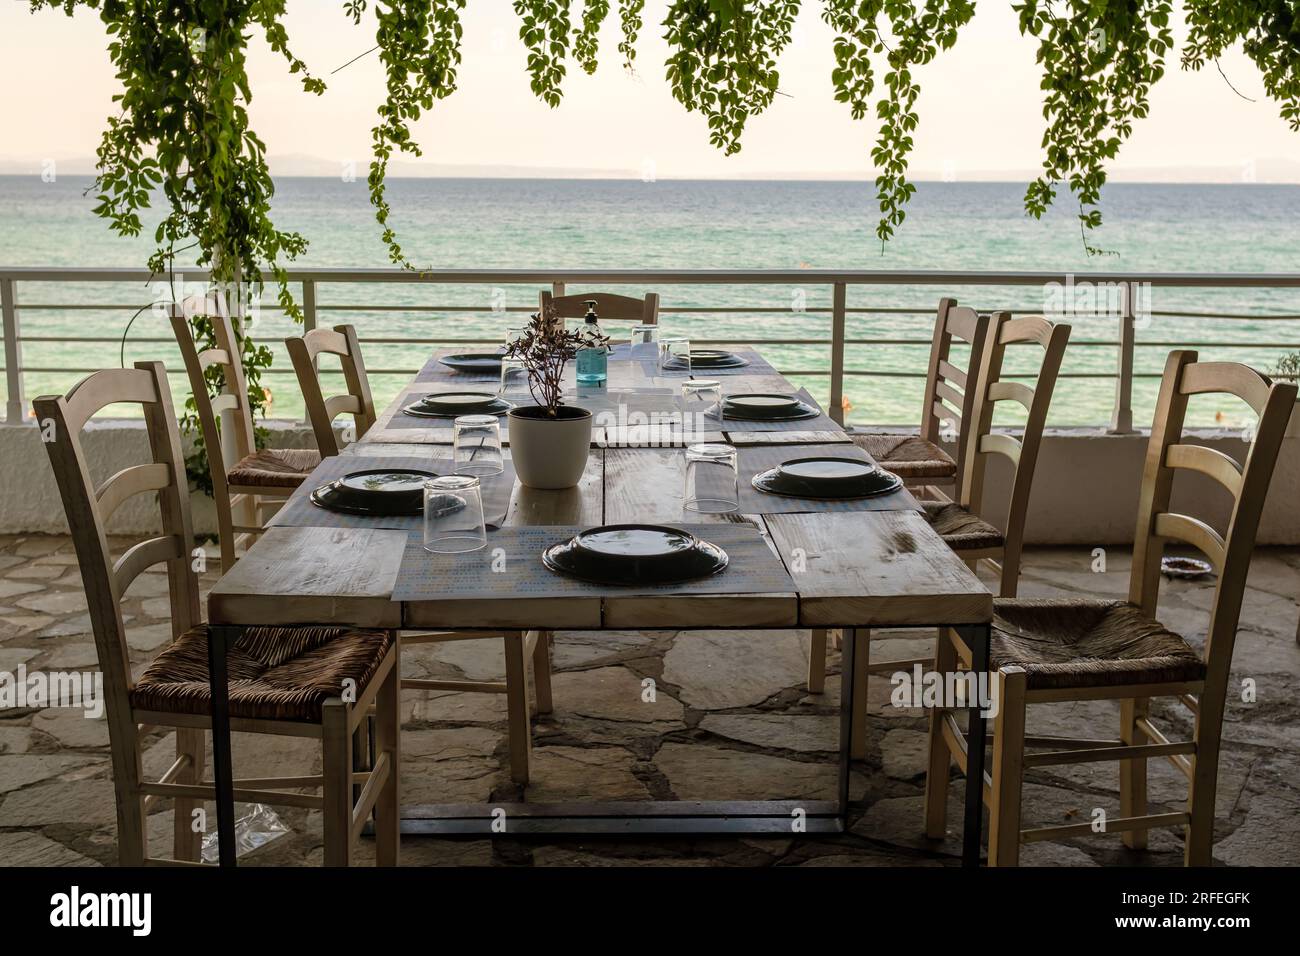 Kriopigi, Greece - August 31, 2022 : View of a beautiful decorated dinner table overlooking the turquoise beach of Kriopigi in Chalkidiki Greece Stock Photo